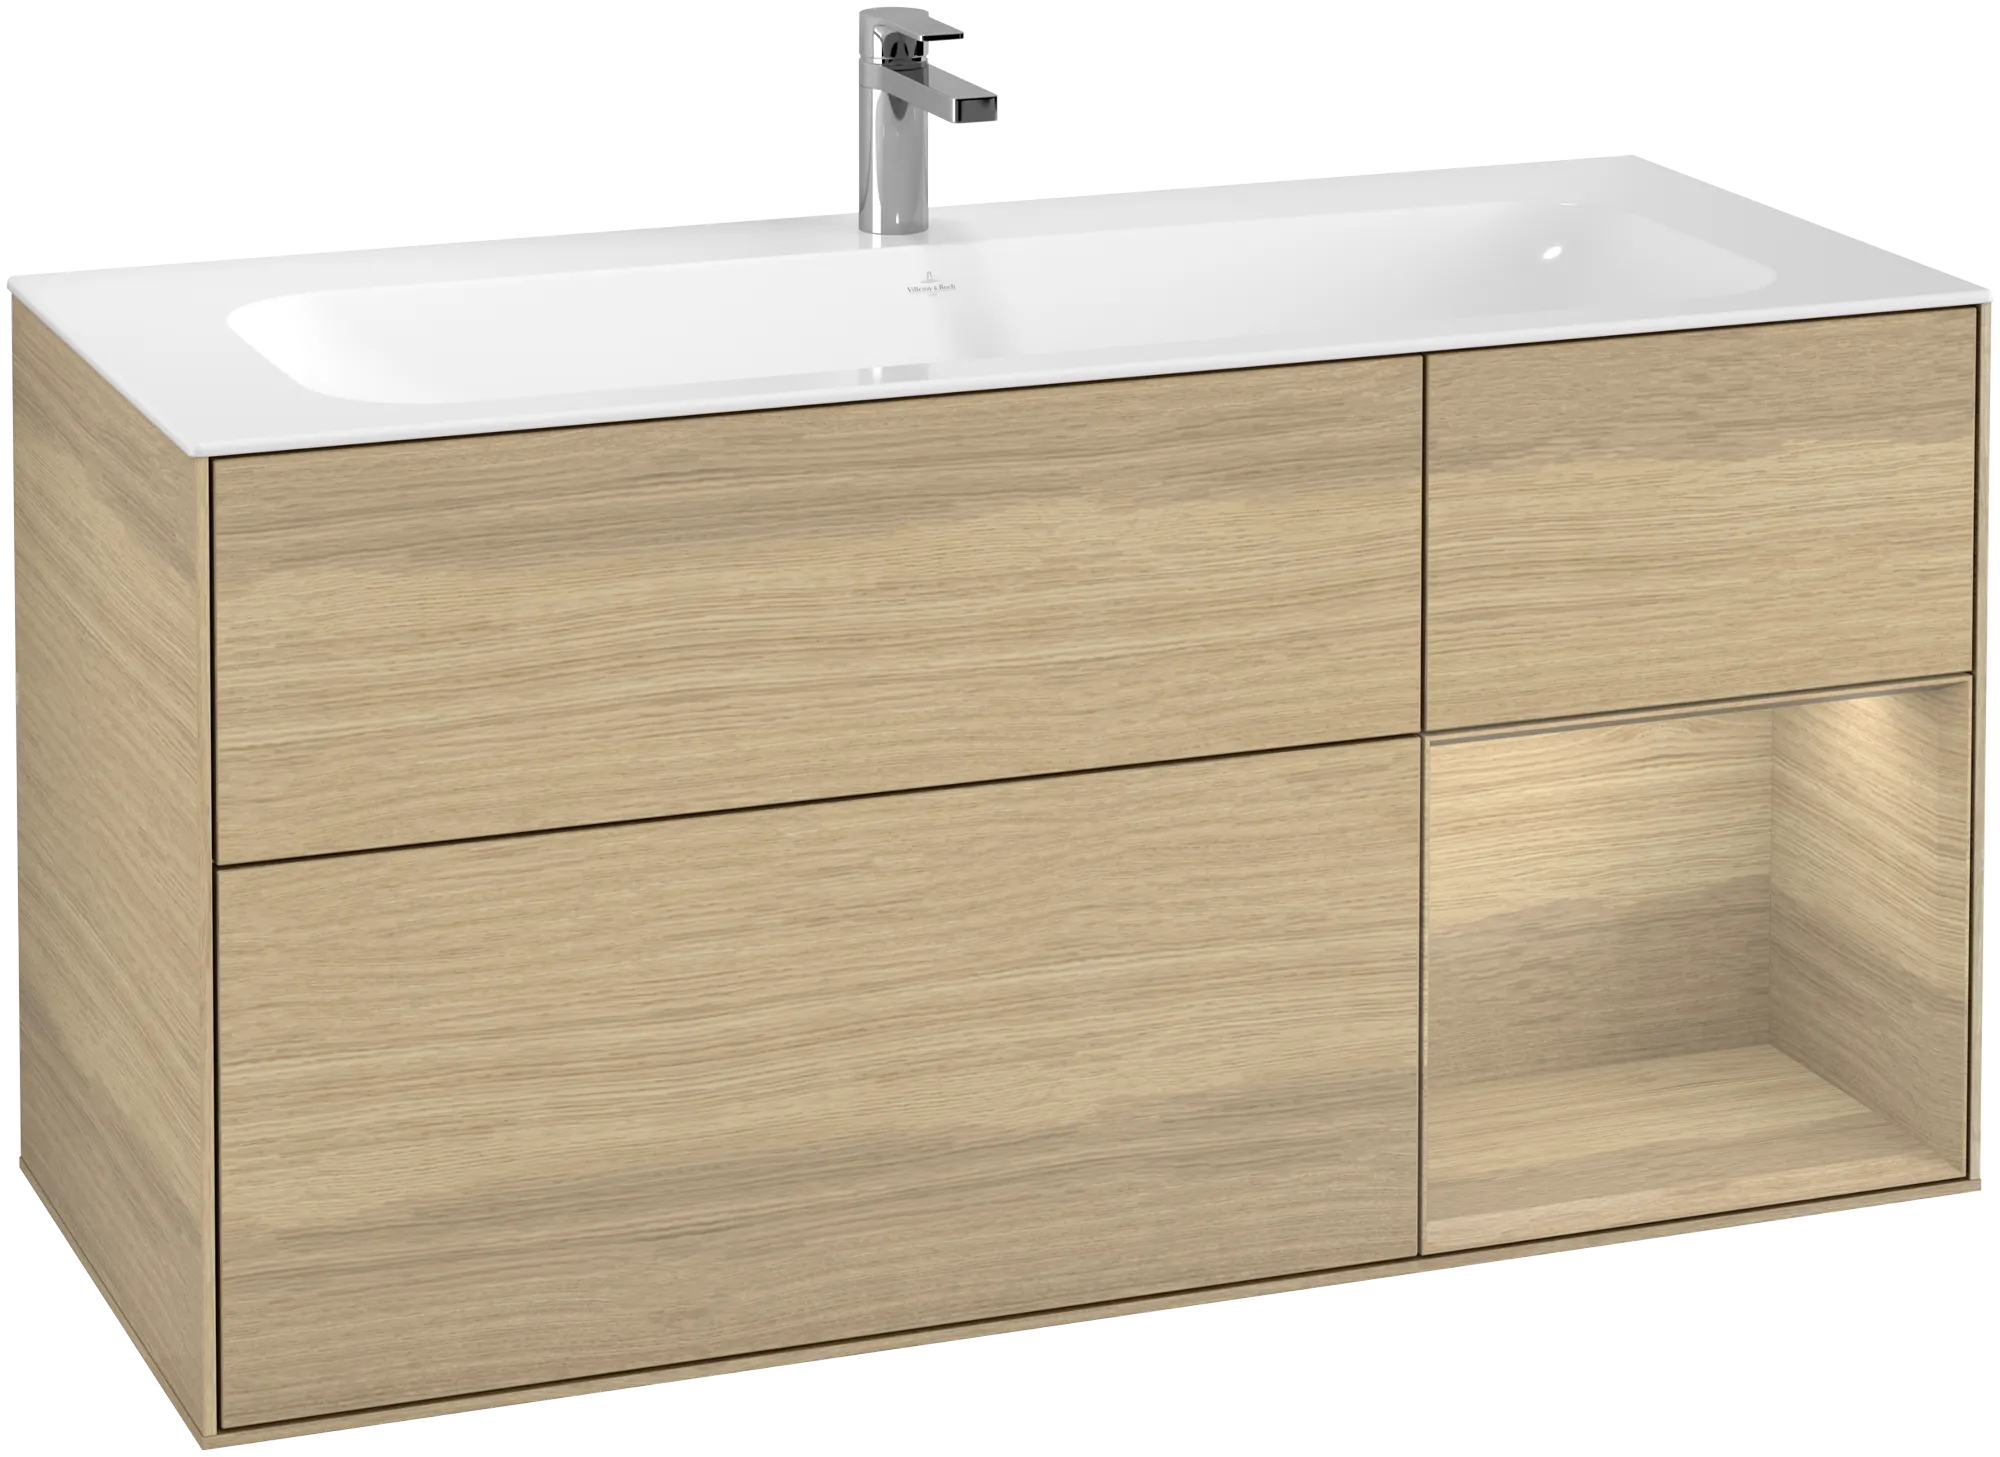 Picture of VILLEROY BOCH Finion Vanity unit, with lighting, 3 pull-out compartments, 1196 x 591 x 498 mm, Oak Veneer / Oak Veneer #G070PCPC